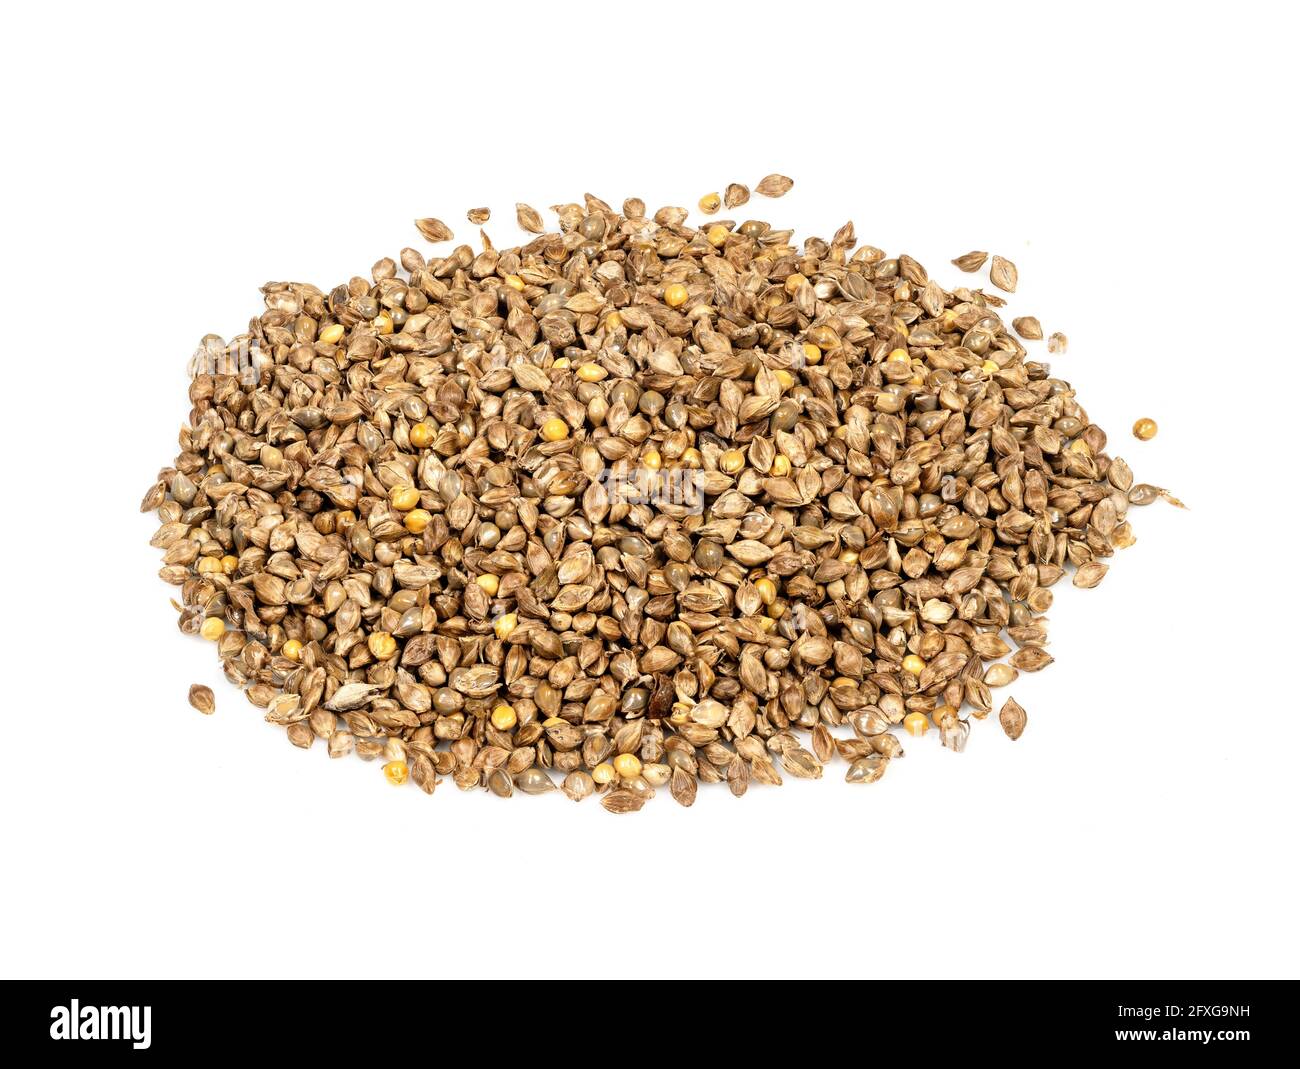 handful of unhulled barnyard millet seeds closeup on white background Stock Photo